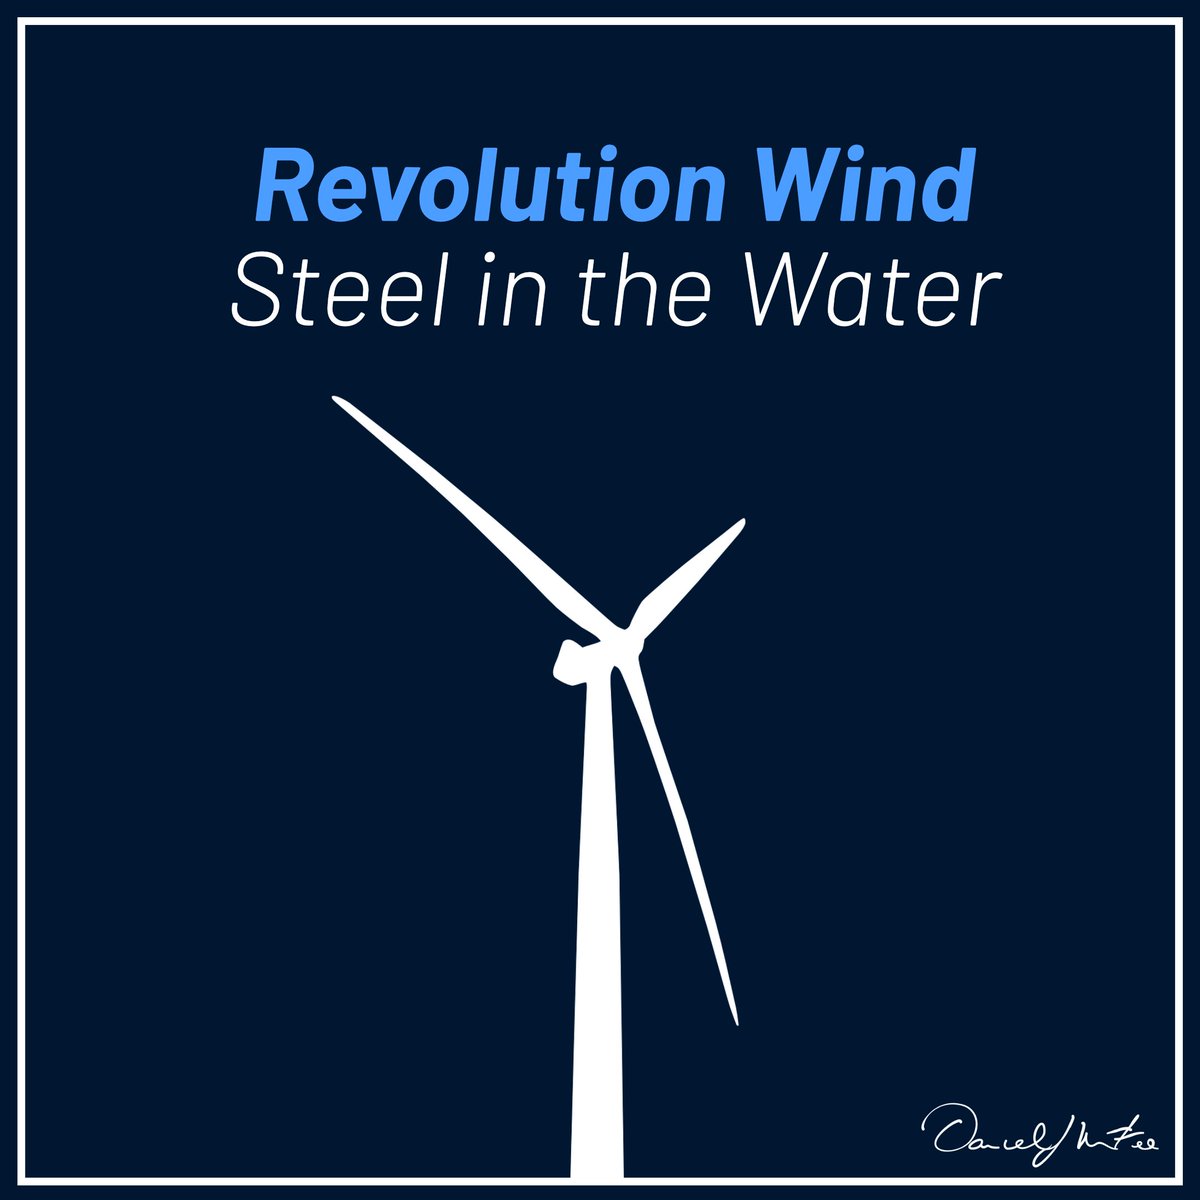 We’re celebrating a major milestone for clean energy development in RI and CT. @RevWind officially has steel in the water with the installation of the 1st turbine foundation for our 1st utility-scale offshore wind farm and America’s 1st multi-state offshore wind project.